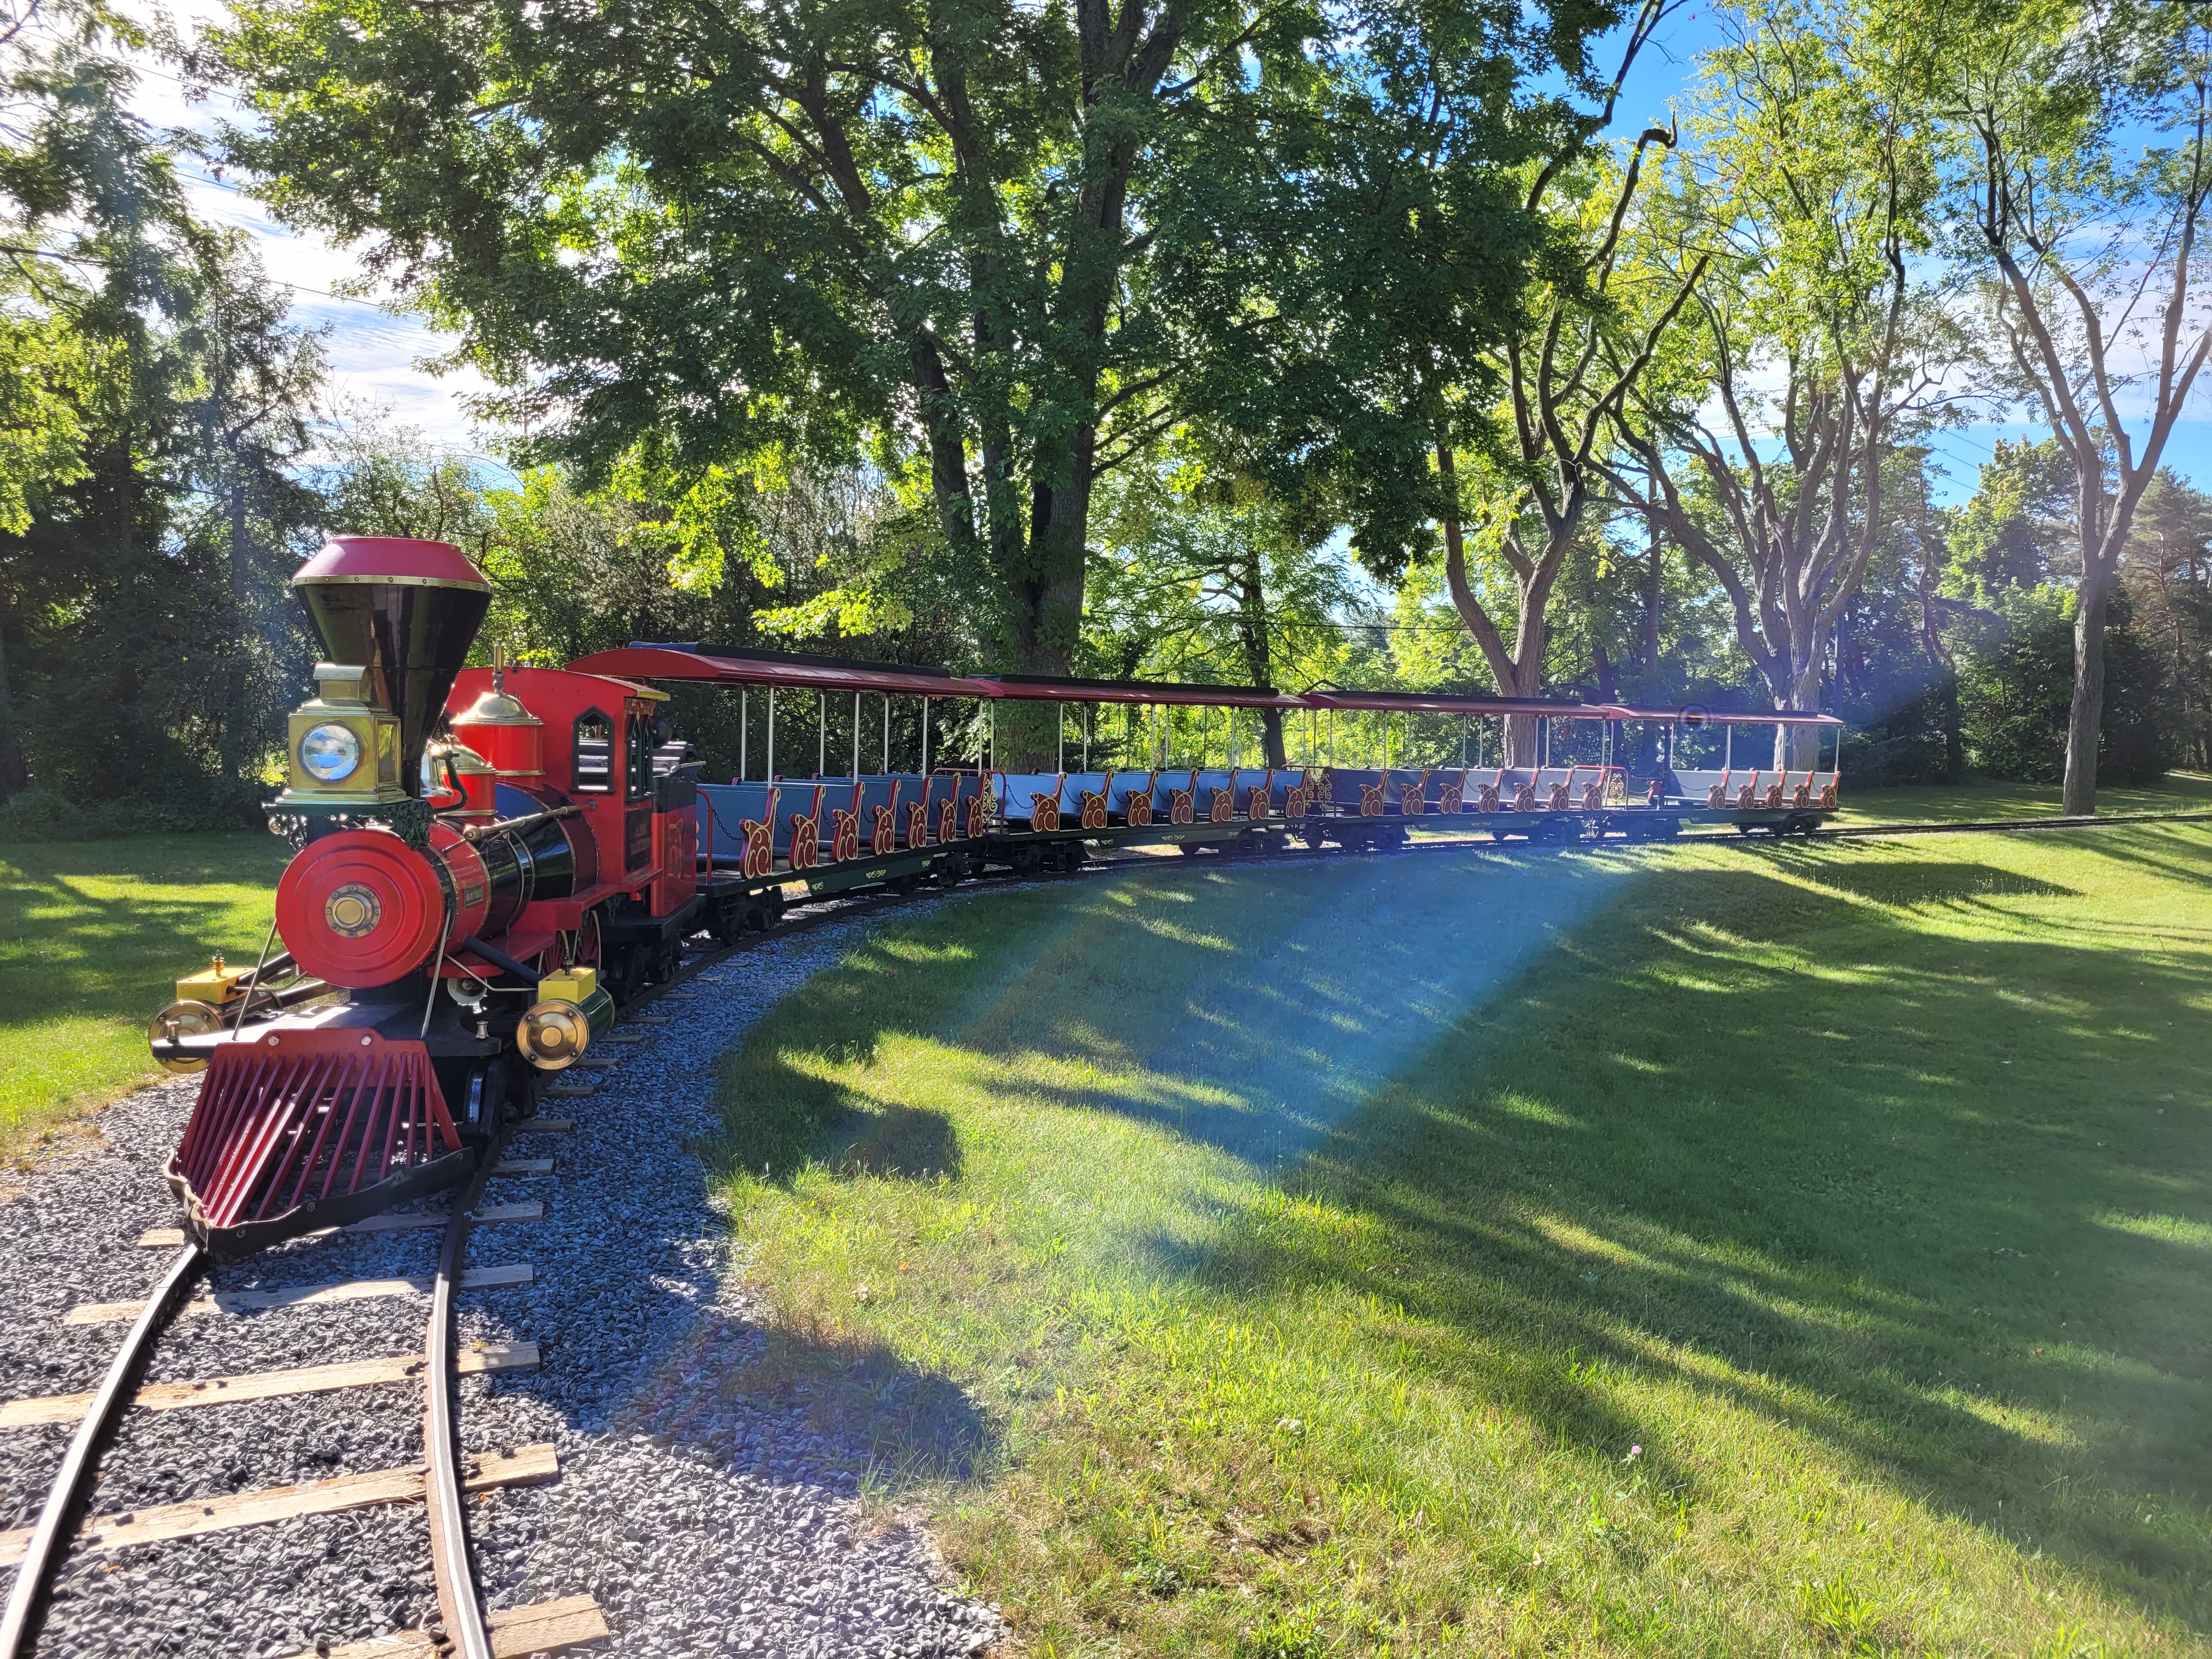 Help support our capital campaign to replace the miniature train ride